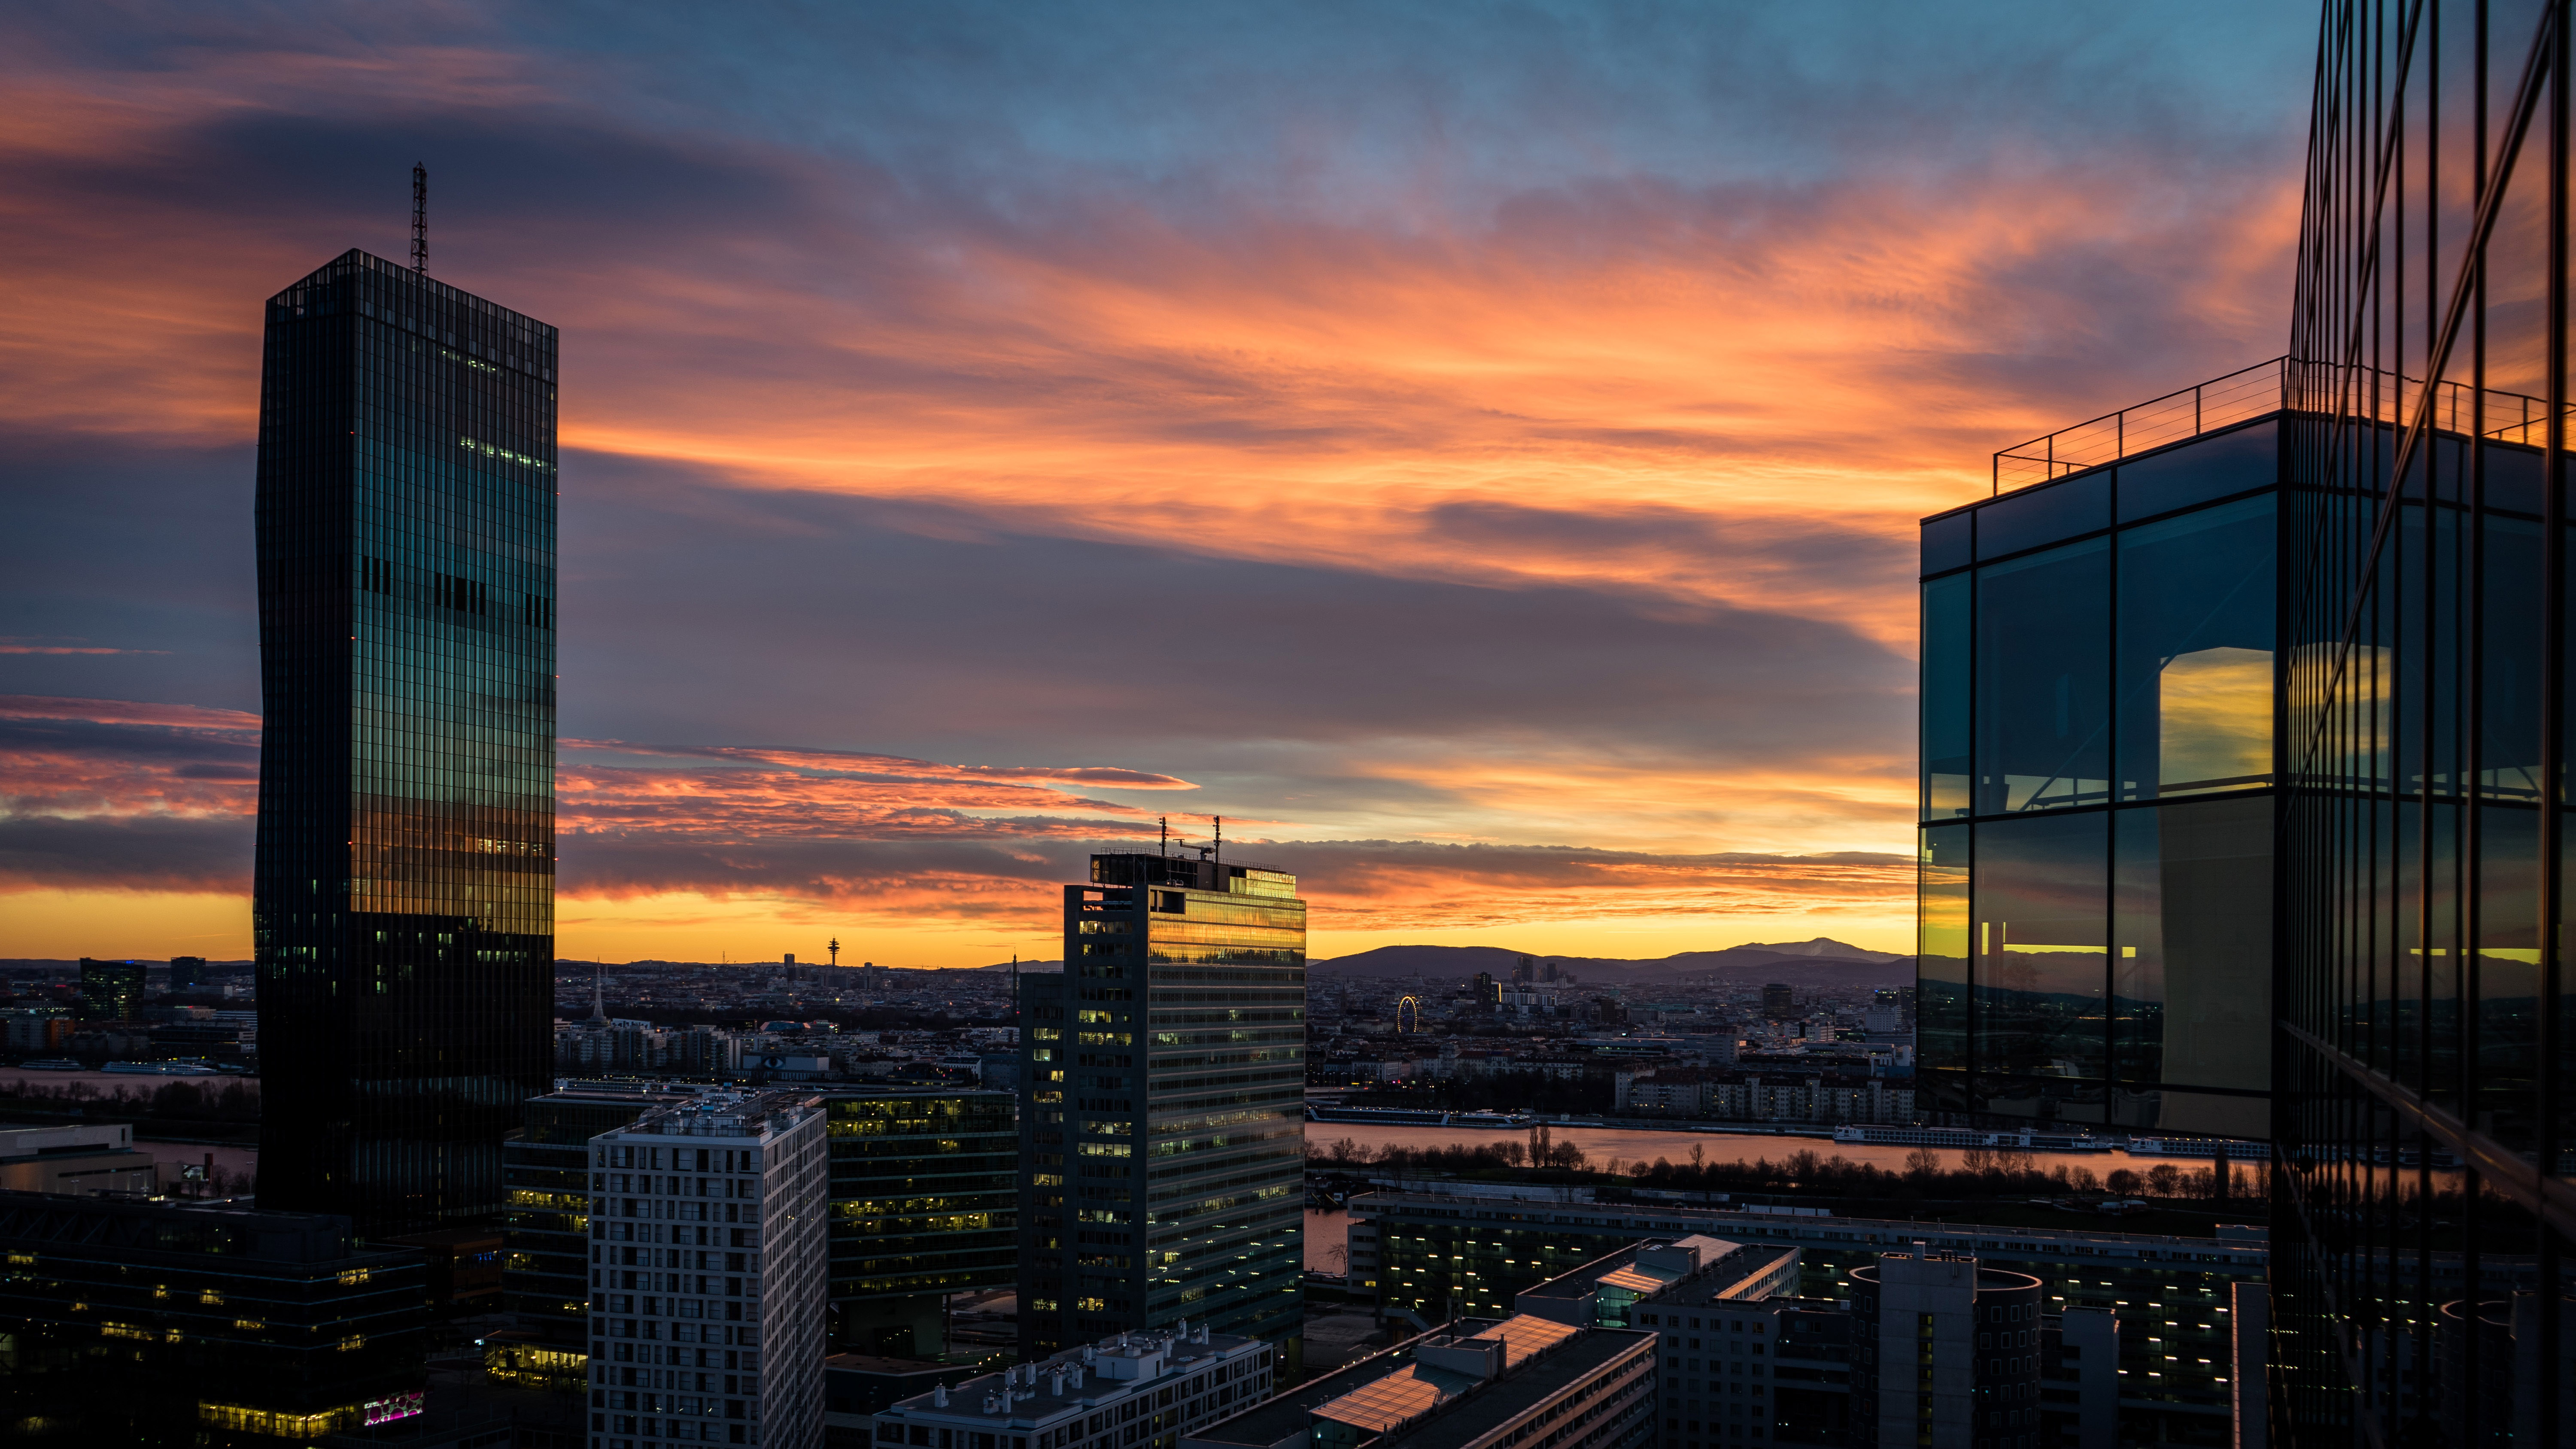 Sunset and city views with towers in Vienna, Austria image - Free stock ...